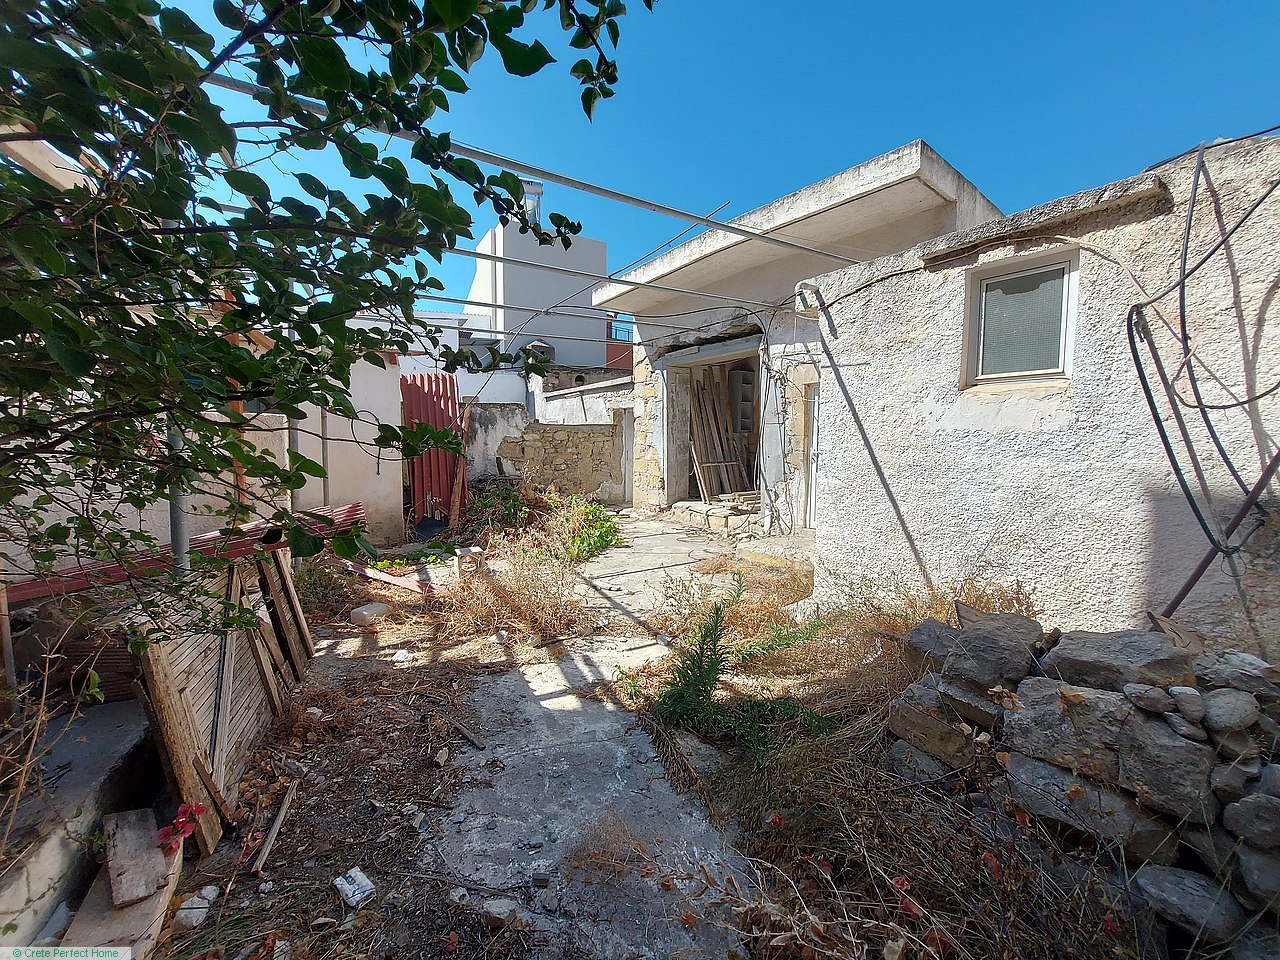 (Part-renovated) 4-room property within village, courtyard, further build allowance, 1500m beach